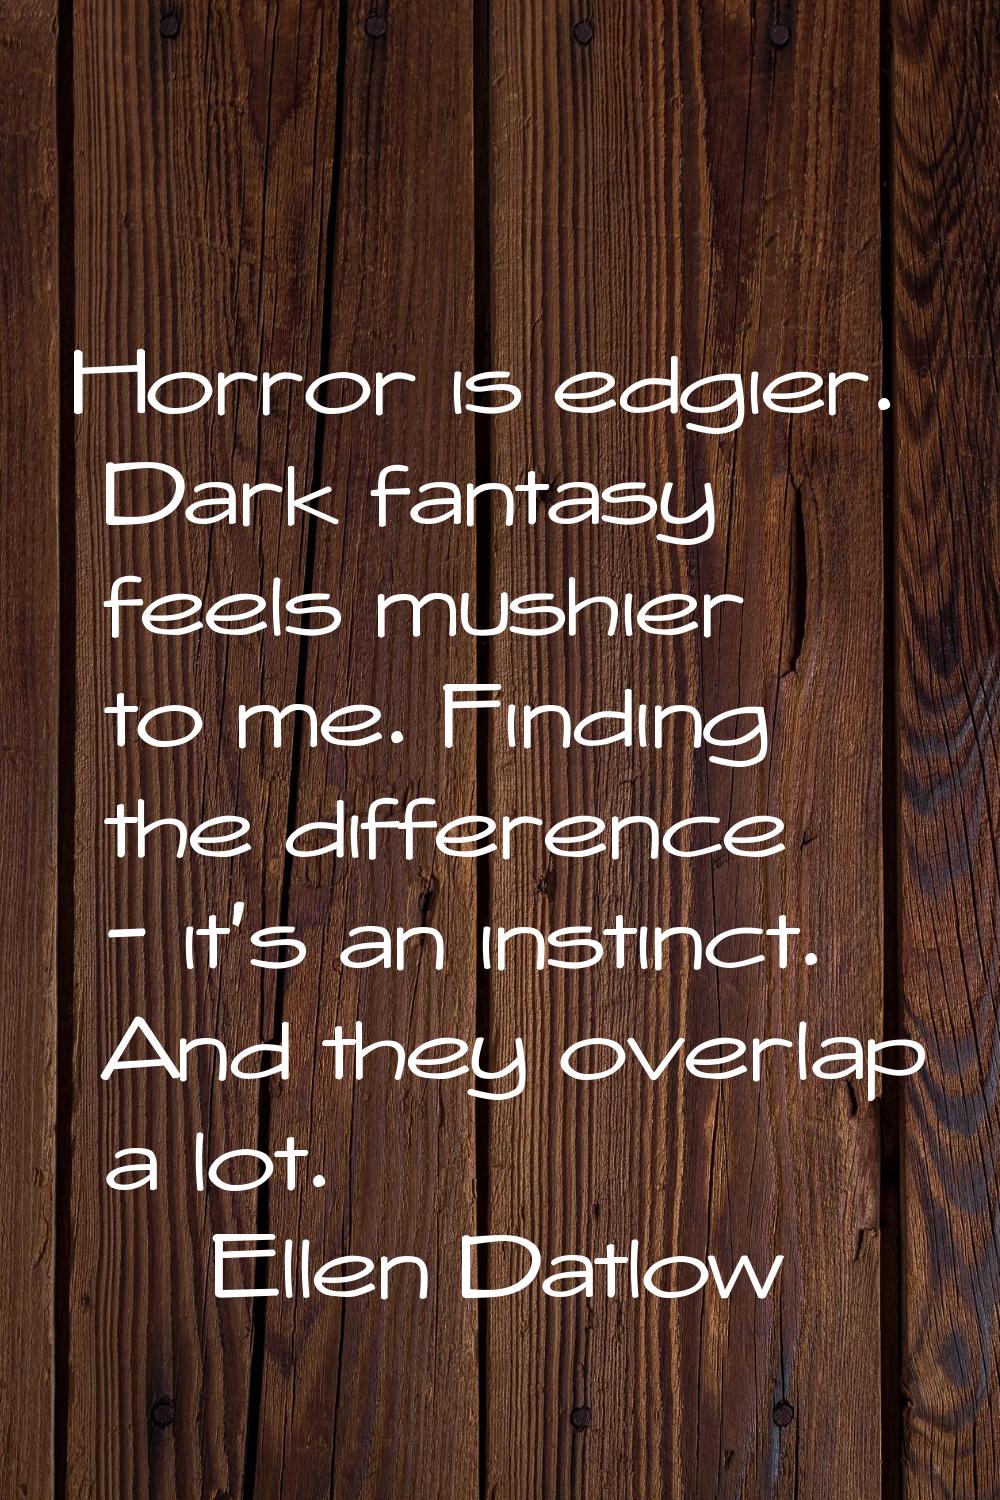 Horror is edgier. Dark fantasy feels mushier to me. Finding the difference - it's an instinct. And 